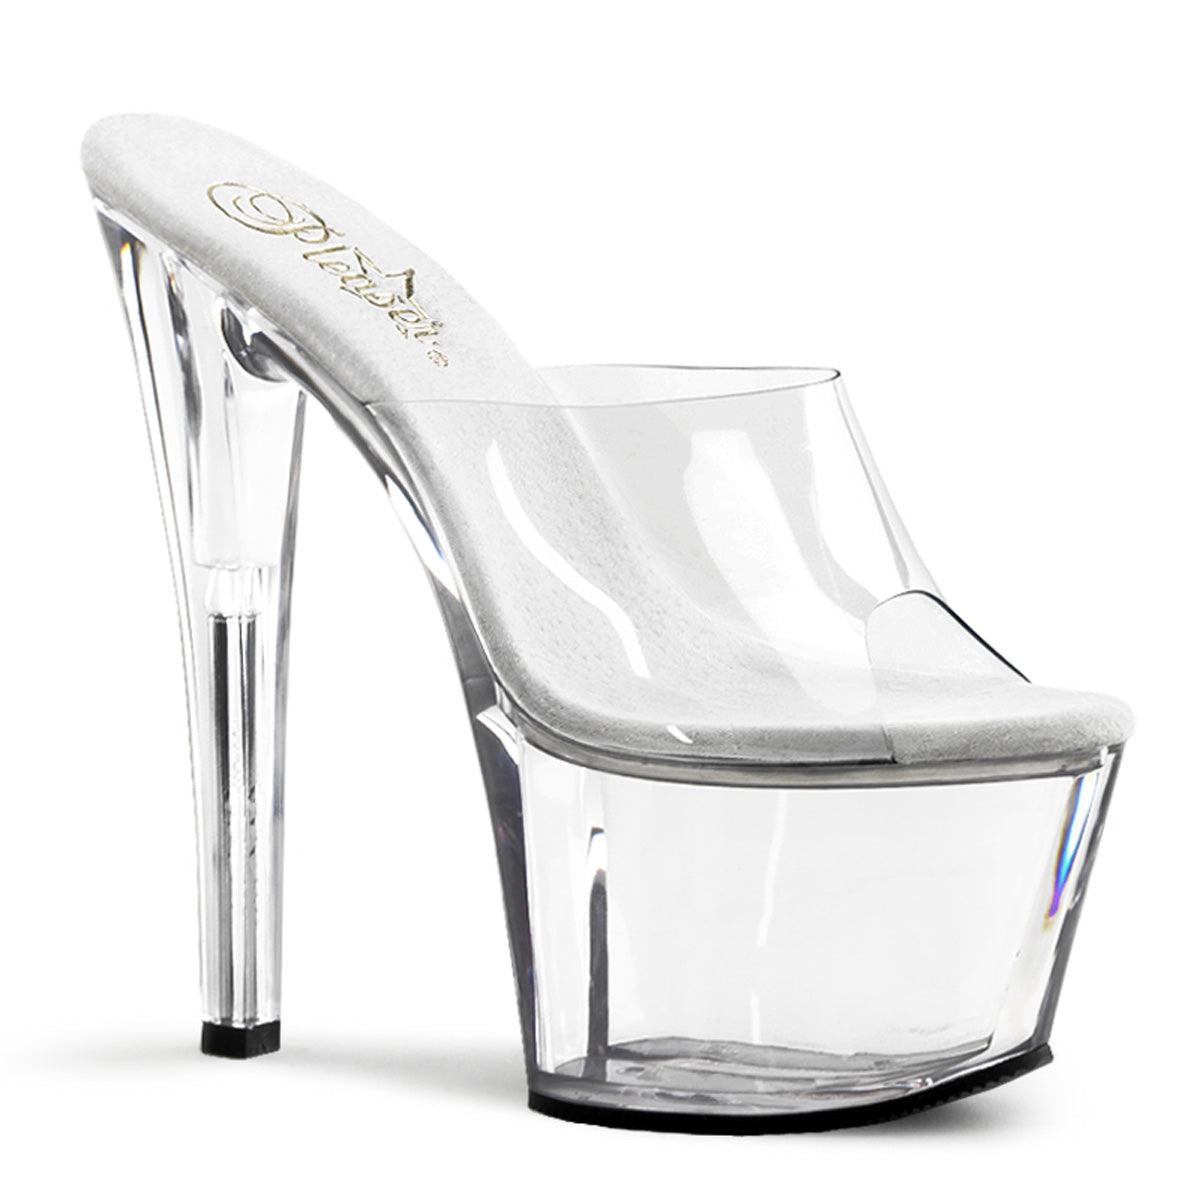 SKY-301 Pleaser 7 Inch Heel Clear Pole Dancing Platforms-Pleaser- Sexy Shoes